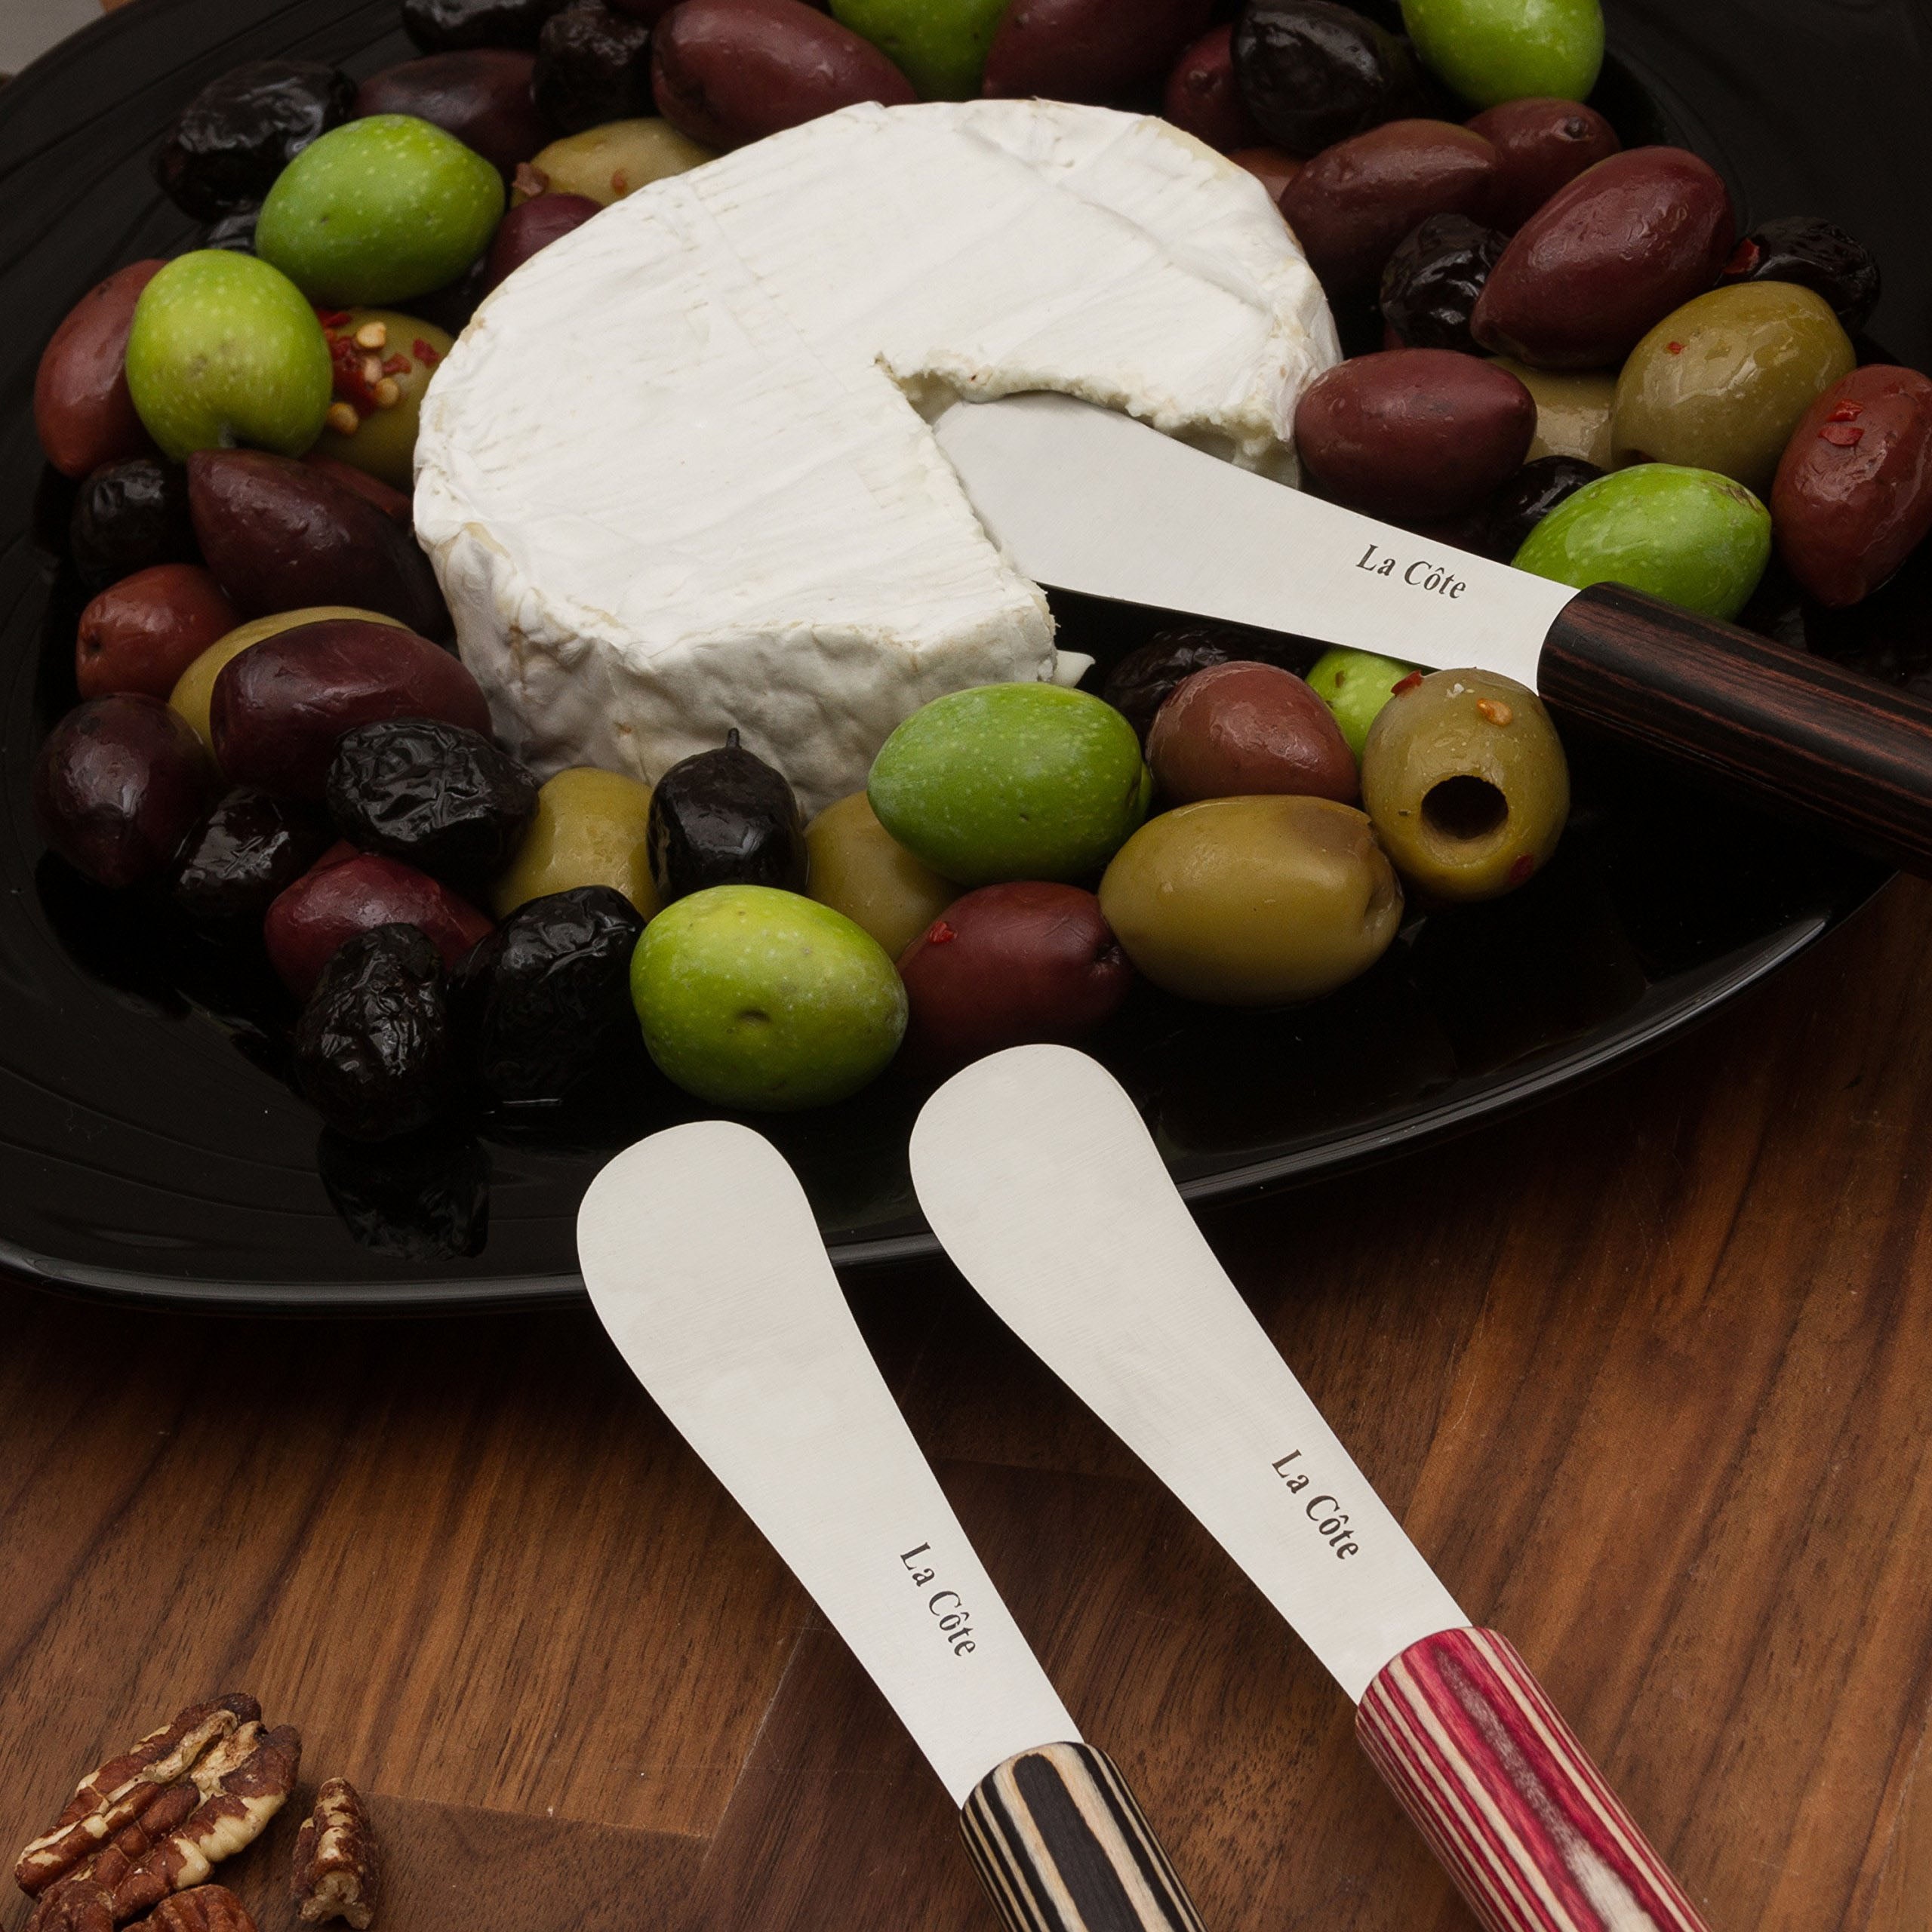 Acopa 6-Piece Stainless Steel Cheese Knife Set